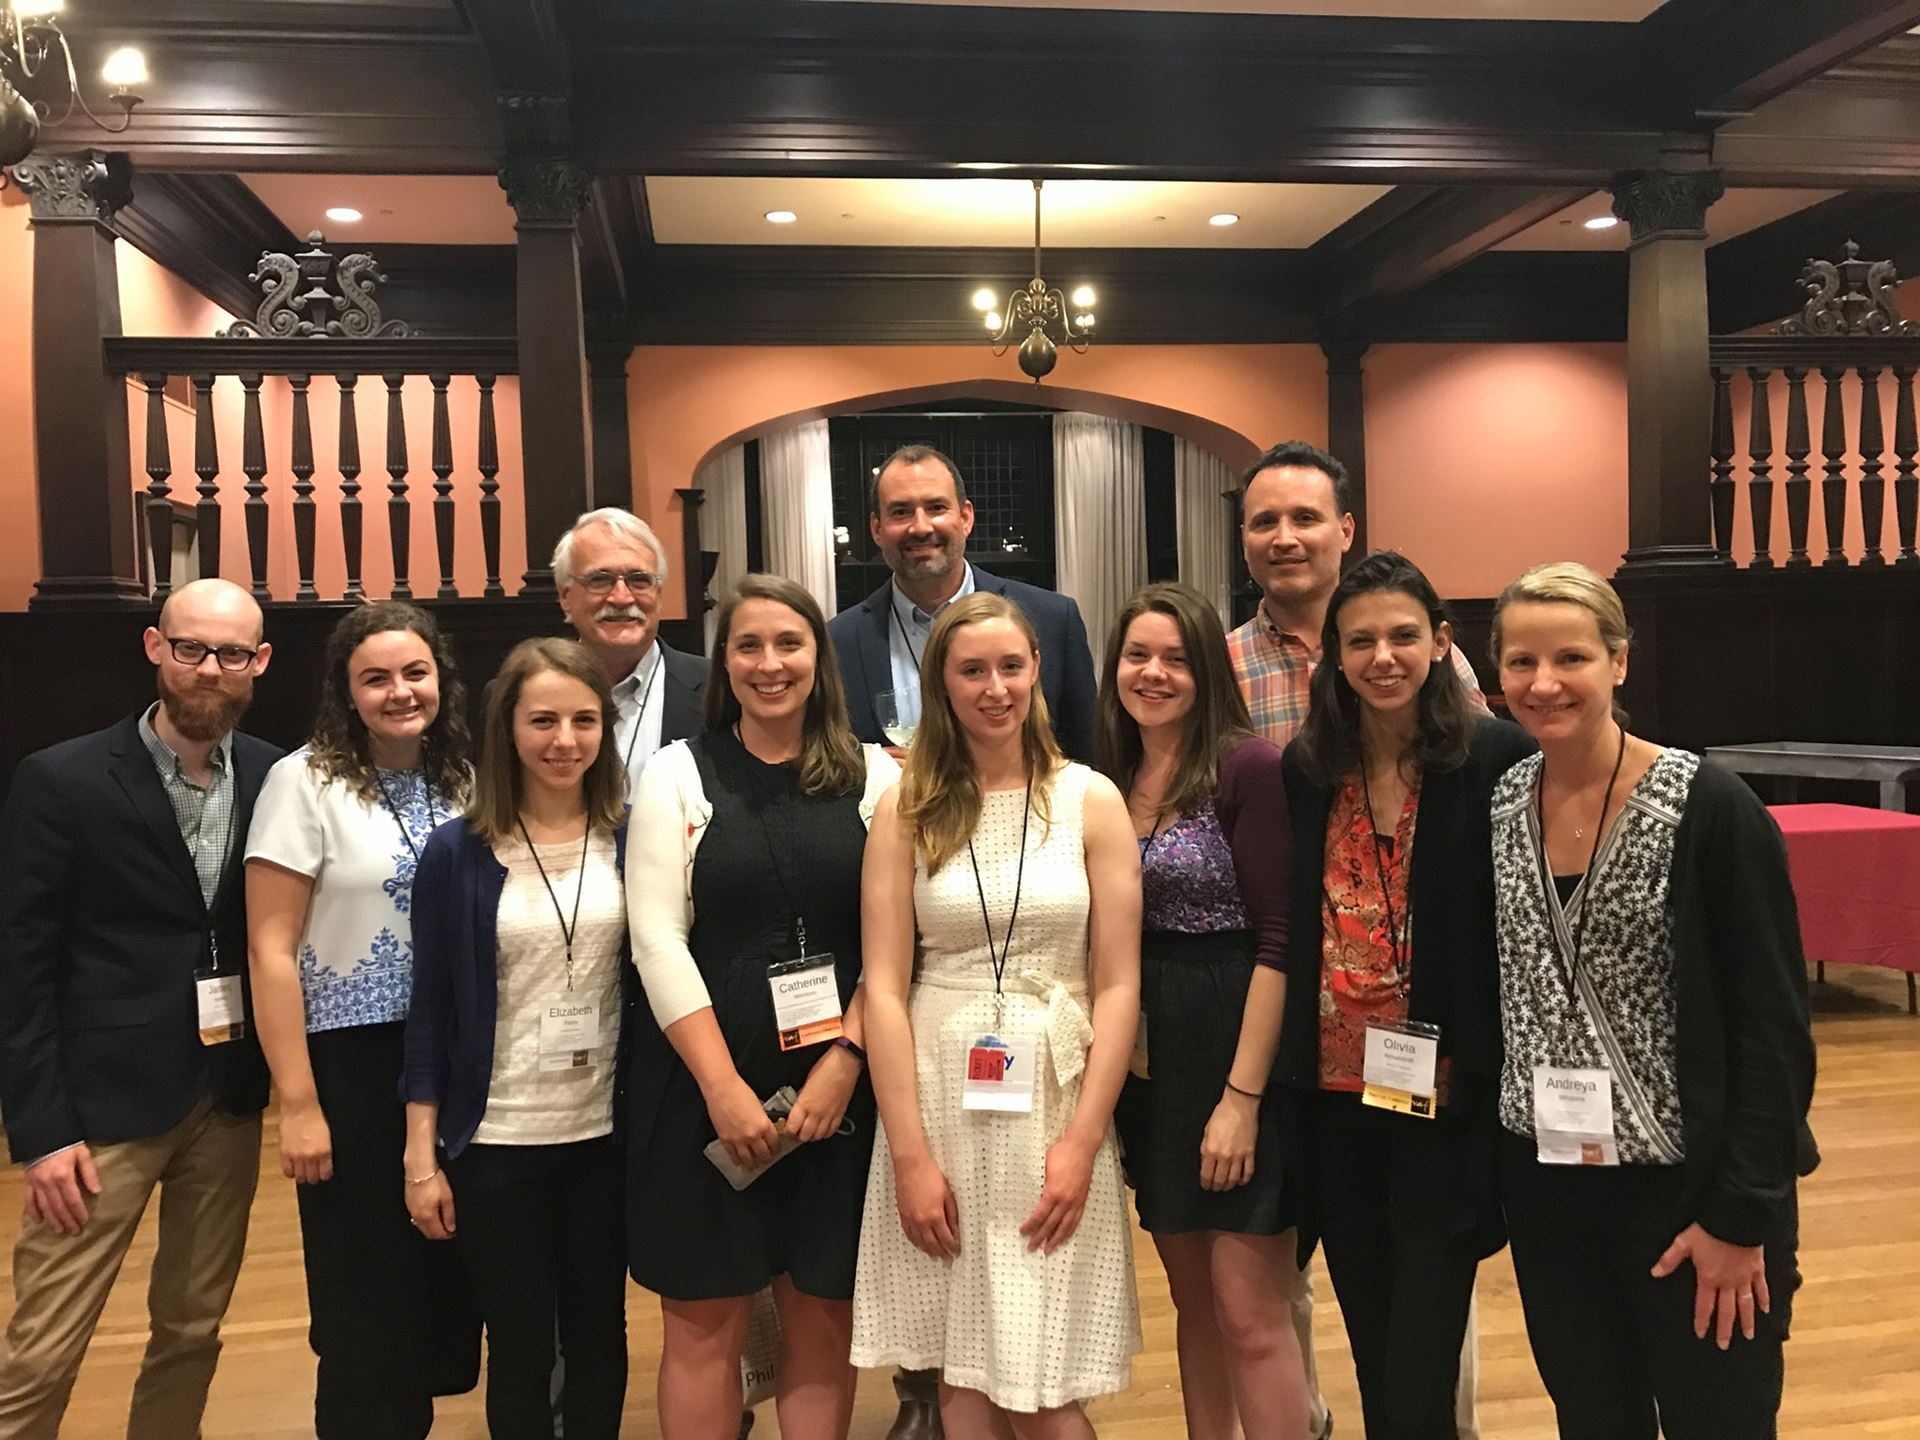 University of Delaware Ambassadors at UPenn. Front Row James Kelleher (Winterthur, Class of 2020), Bethany McGlyn (Winterthur, Class of 2020), Elizabeth Palms (Winterthur, Class of 2020), Catherine Morrissey (CHAD Assistant Director Faculty Sponsor), Mary Fesak (UD-American Civilization PhD), Kimberley Showell (UD-Historic Preservation Graduate Certificate Class of 2019), Olivia Armandroff (Winterthur, Class of 2020), and Andreya Mihaloew (UD-Historic Preservation Graduate Certificate Class of 2019). Back Row Ritchie Garrison (Director of Winterthur Program), Michael J. Emmons, Jr. (CHAD Faculty Sponsor), and Jamie McGee (UD-Historic Preservation Graduate Certificate Class of 2019)